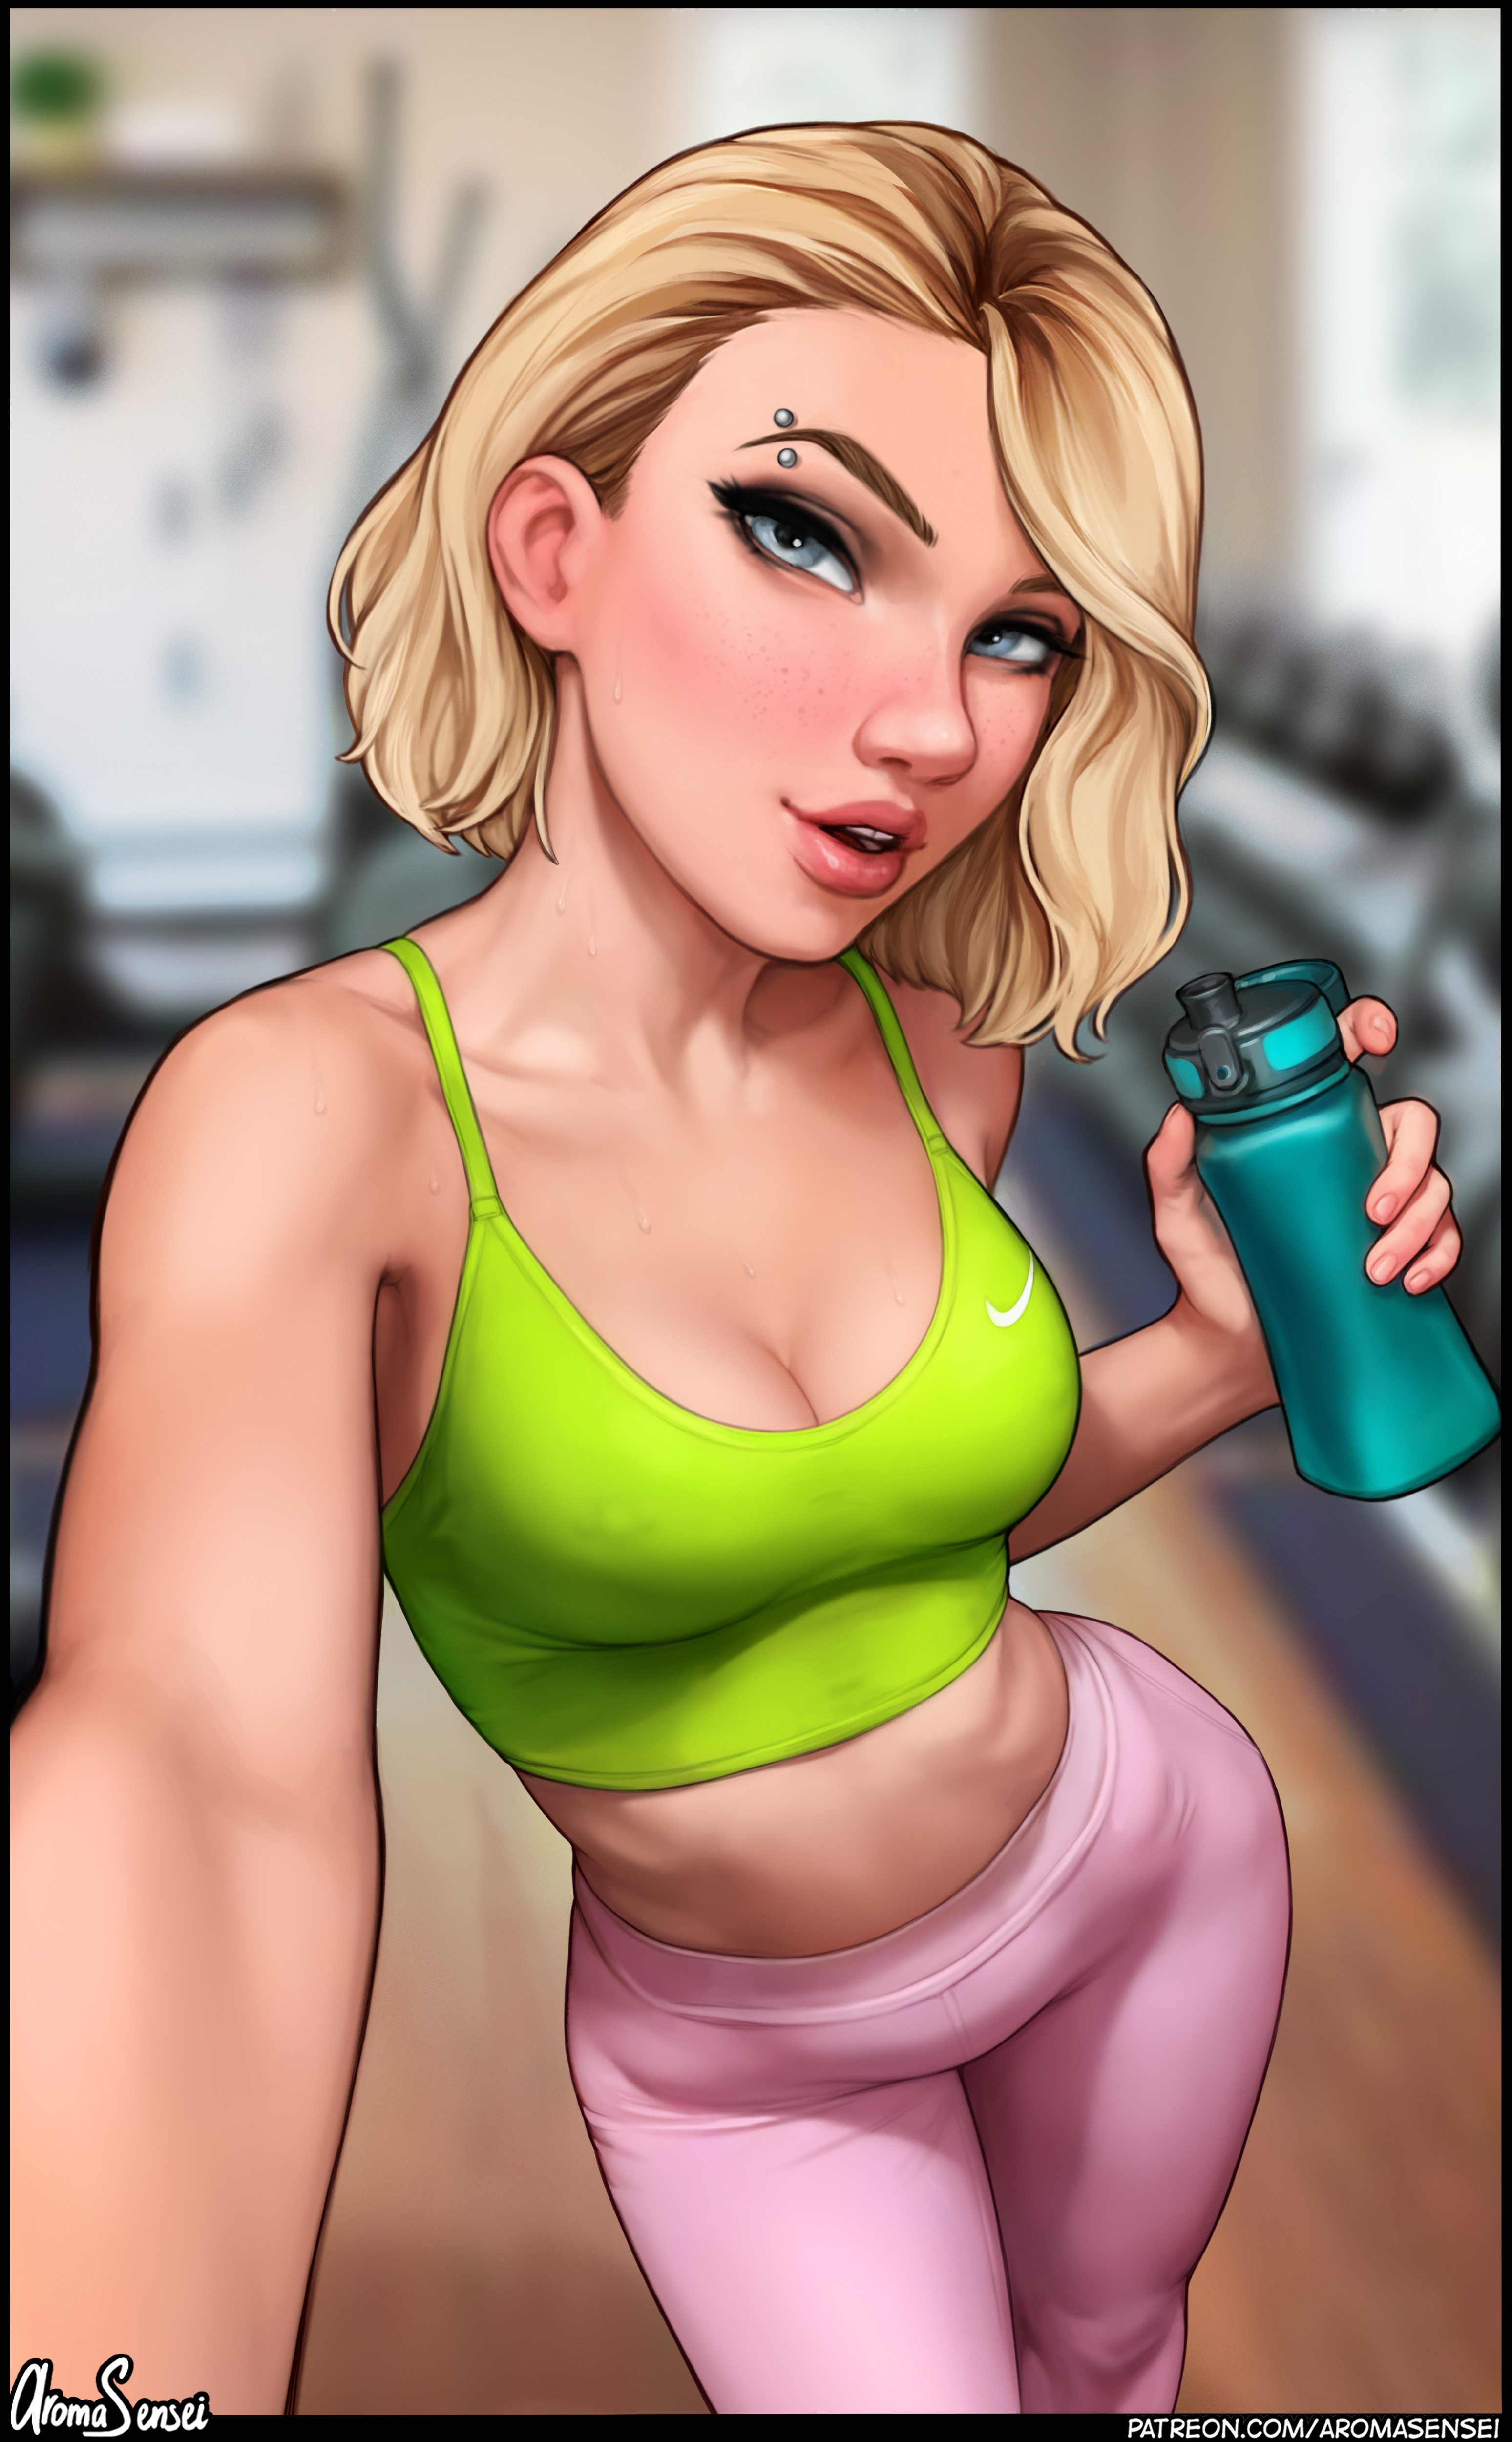 Gwen Stacy Marvel Comics Blonde Gym Clothes Green Top Pierced Eyebrow Parted Lips Freckles Selfies 2 3096x5000